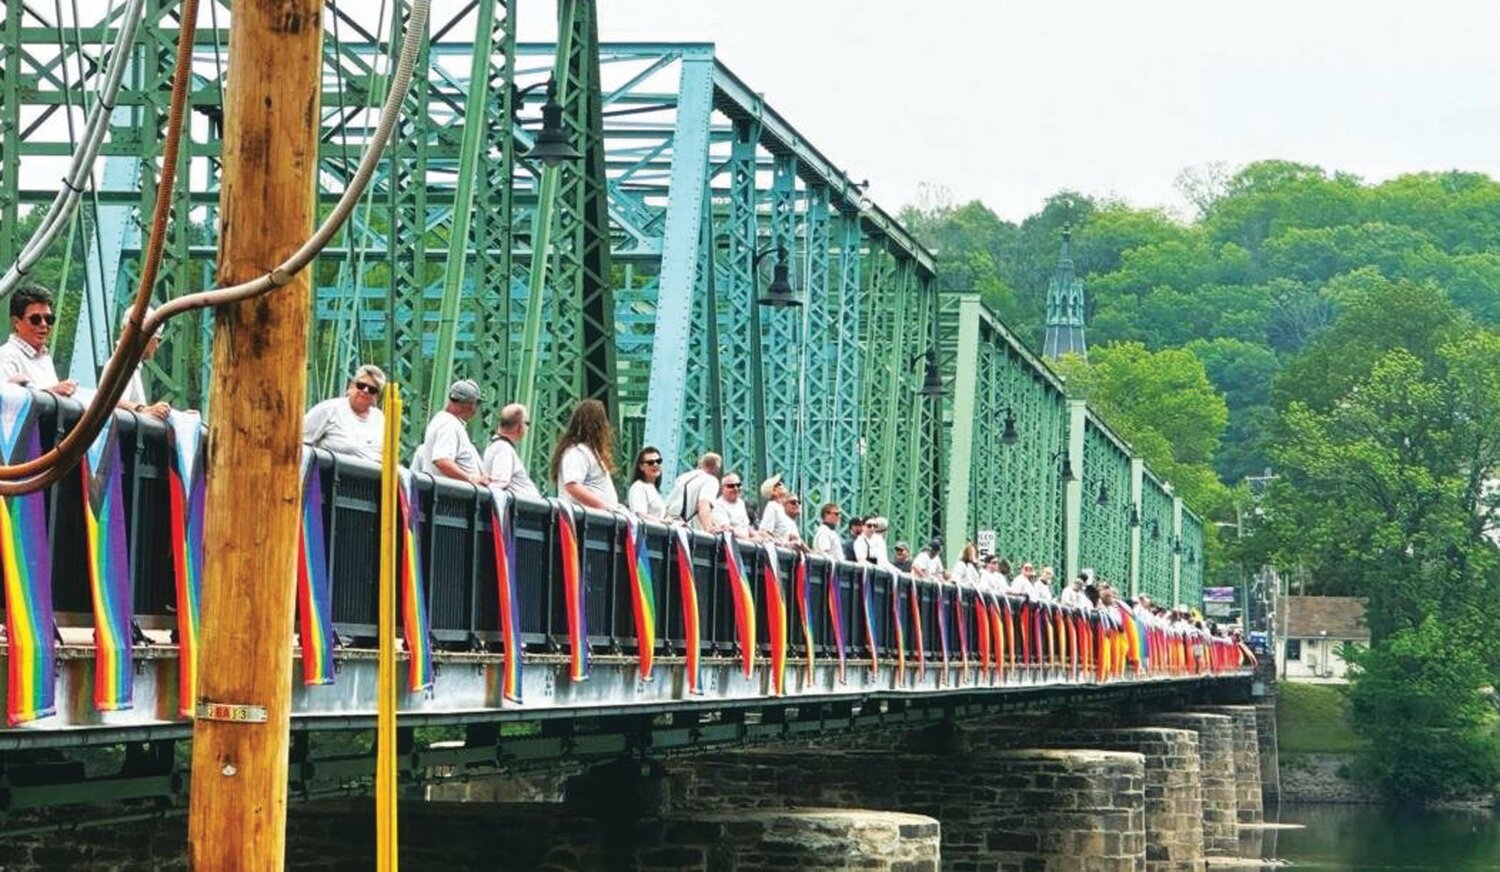 The 119-year-old New Hope-Lambertville Toll-Supported Bridge will undergo its first rehabilitation since 2004 early next year. The work will include repairs, repainting, replacement of the pedestrian walkway and installation of an LED lighting system.